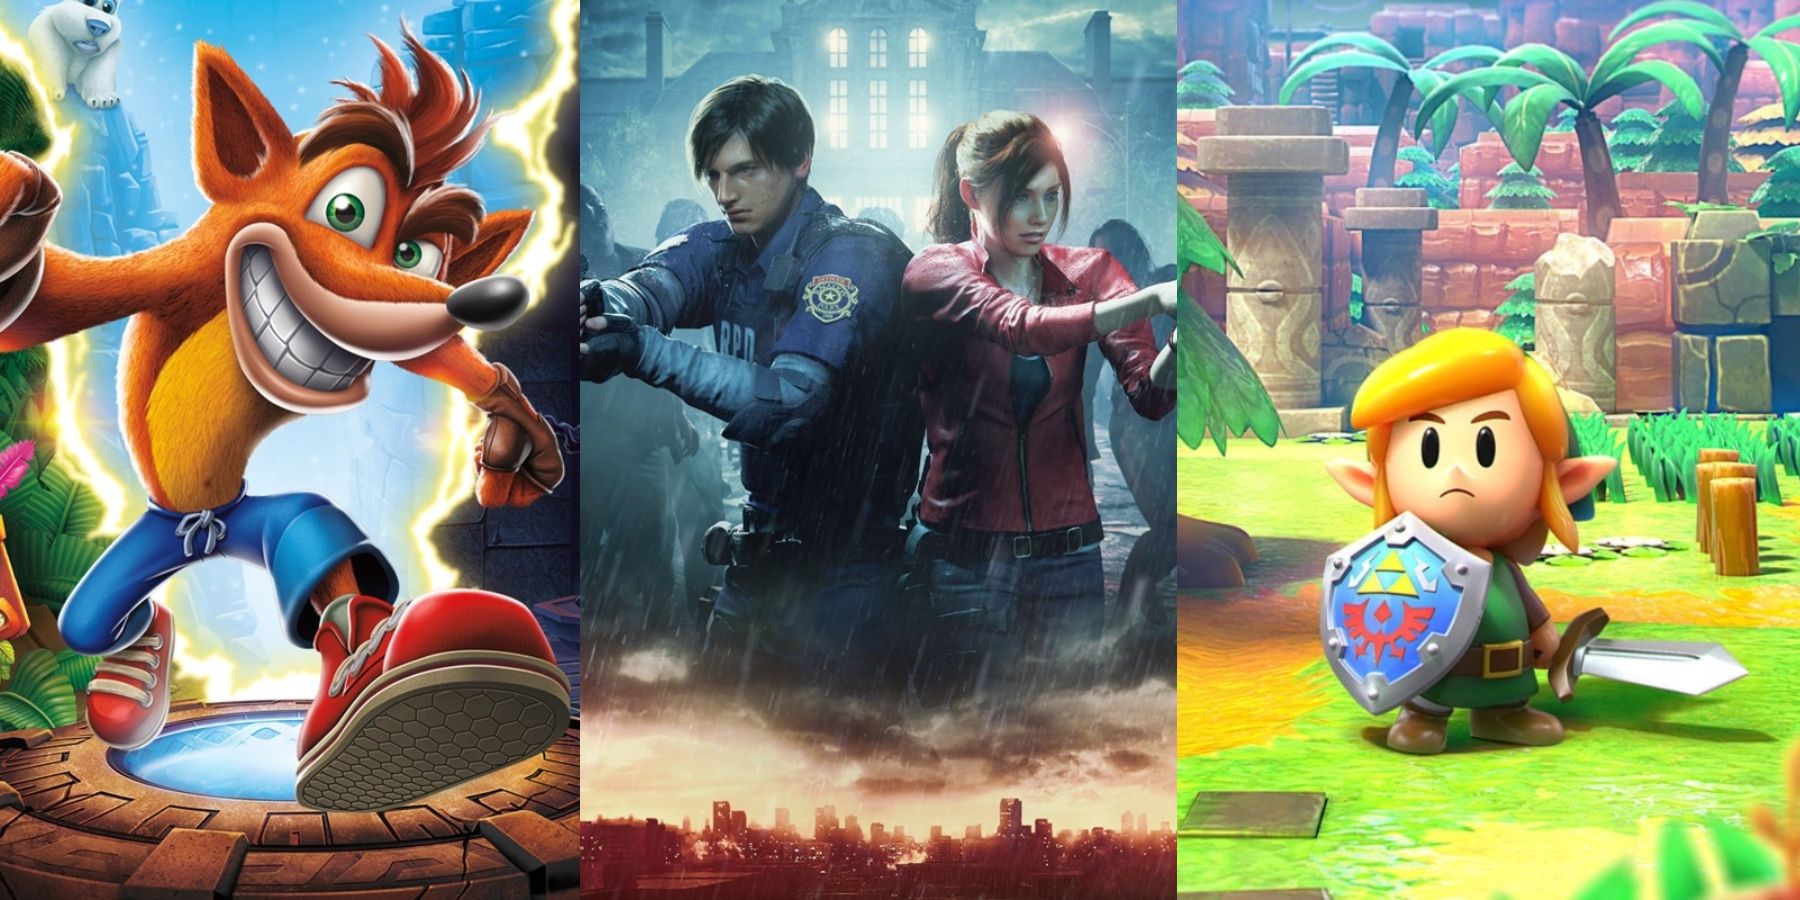 A collage of three awesome remastered games, featuring Crash Bandicoot, Resident Evil 2, and Link's Awakening